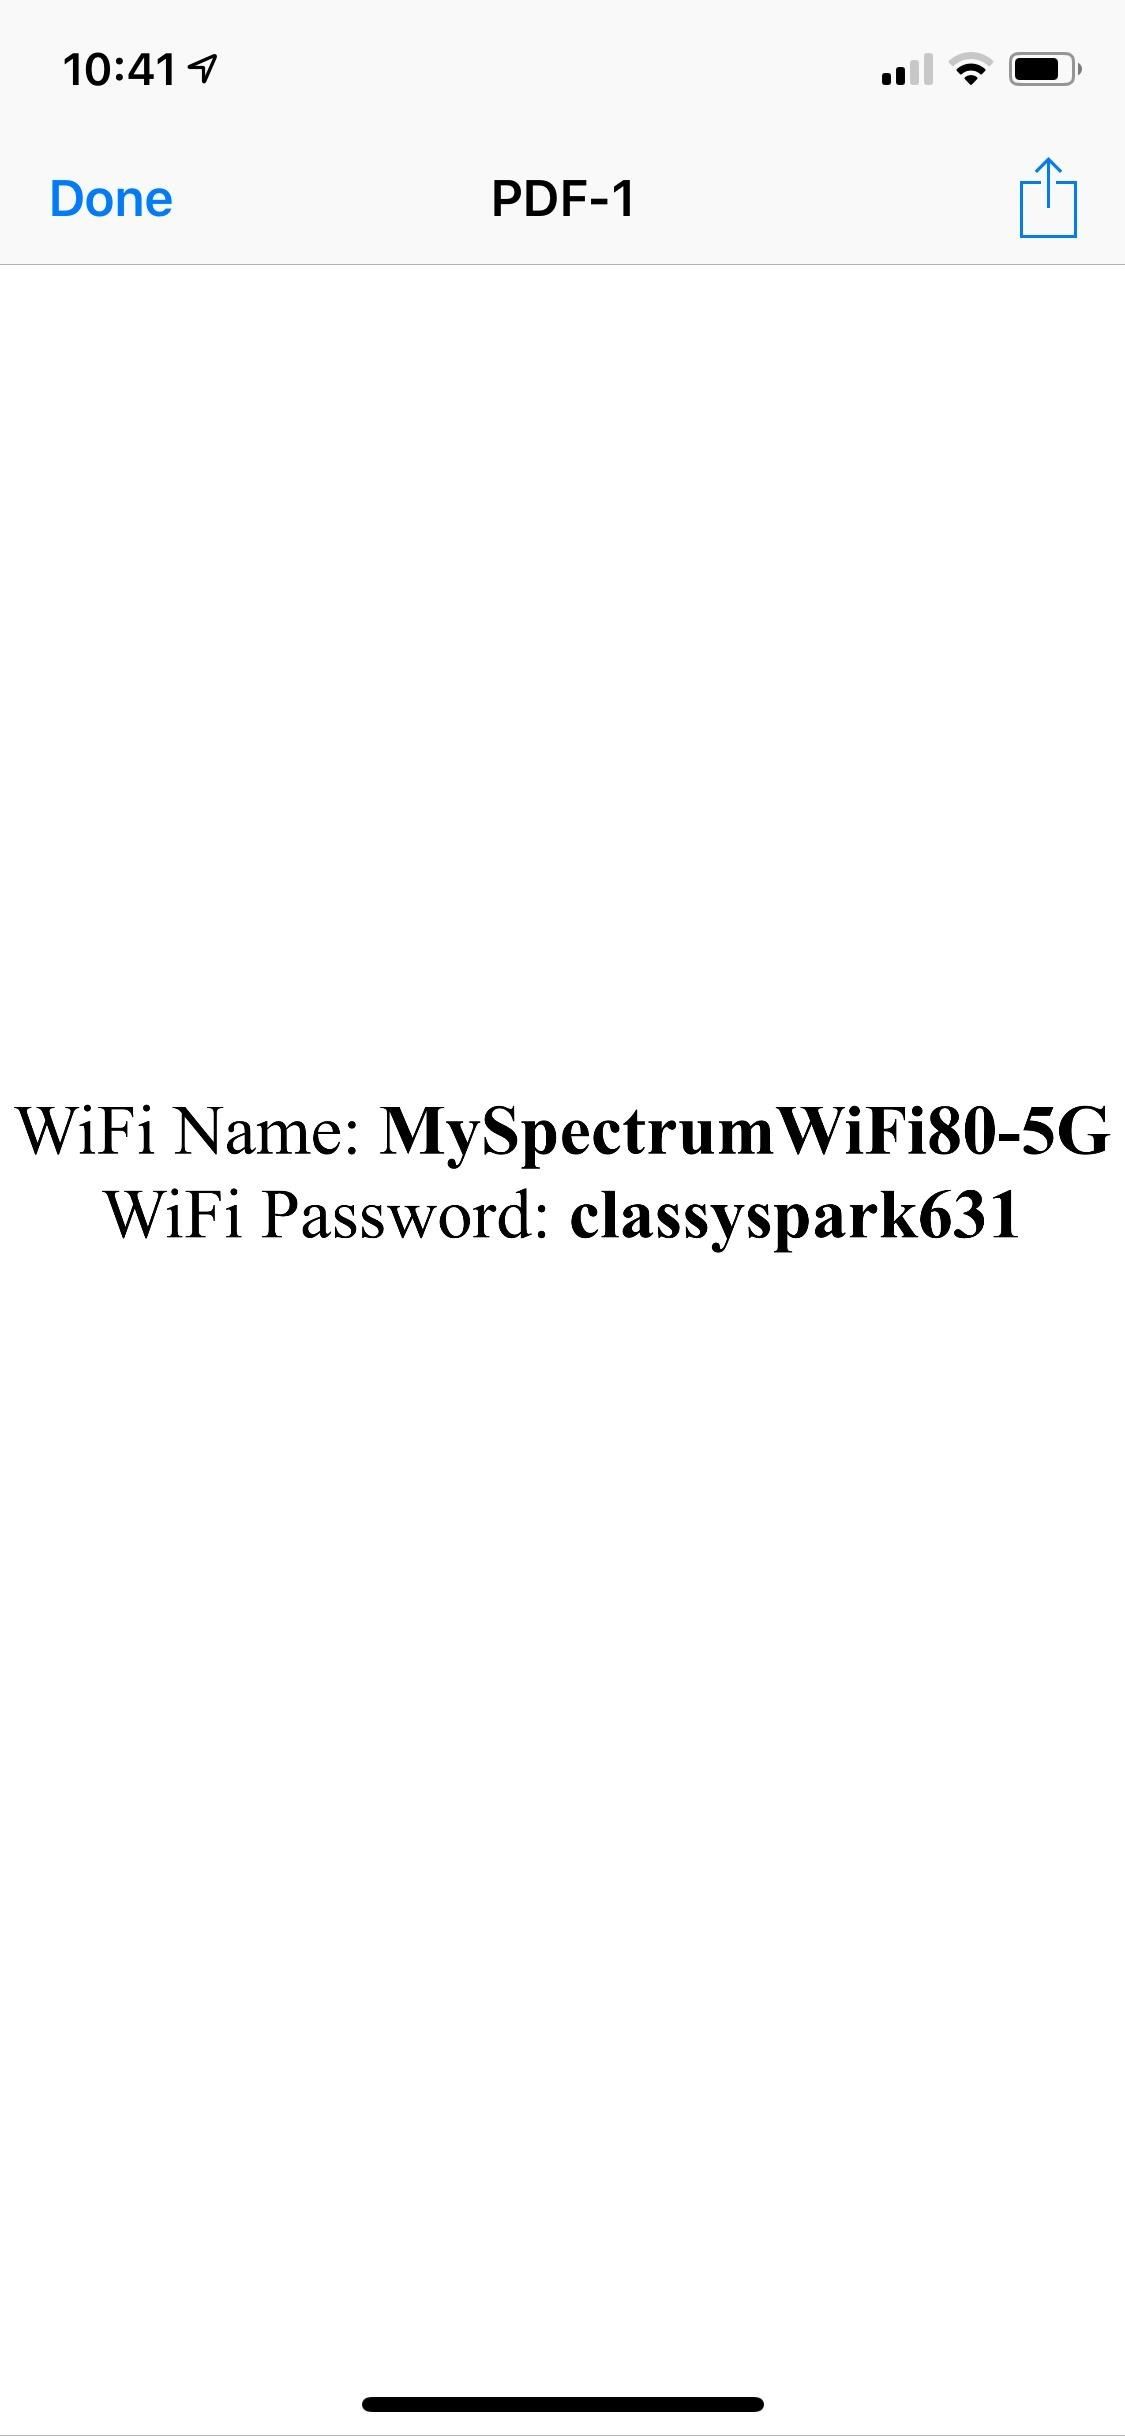 Easily Store Your iPhone's Wi-Fi Passwords & Share Them with Anybody — Even Android Users